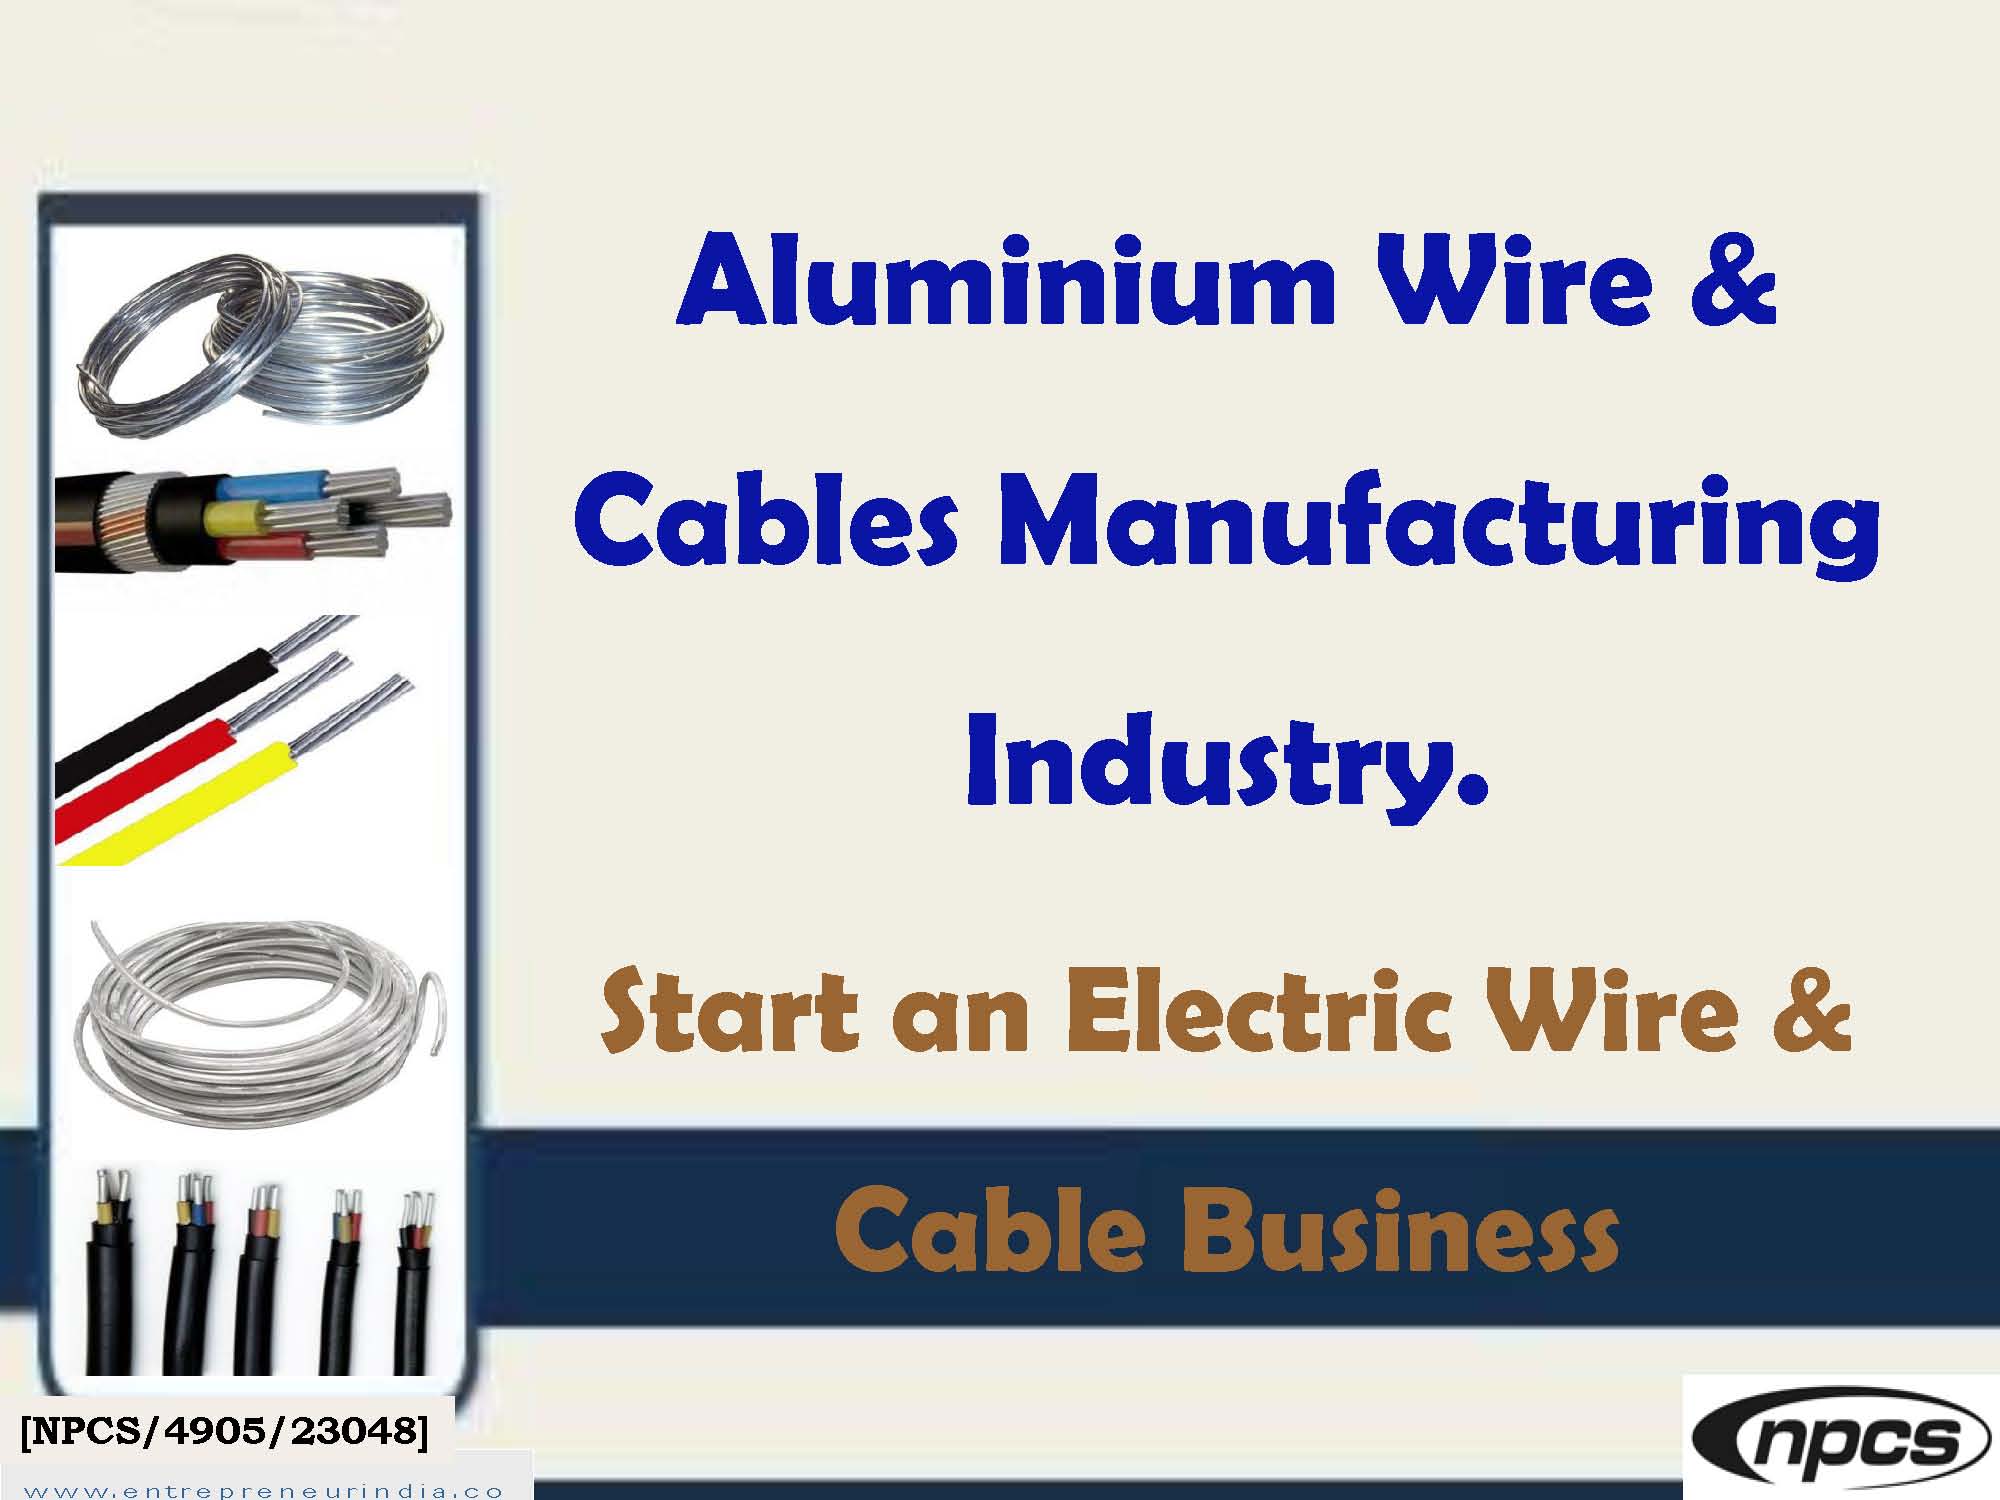 Aluminium Wire & Cables Manufacturing Industry